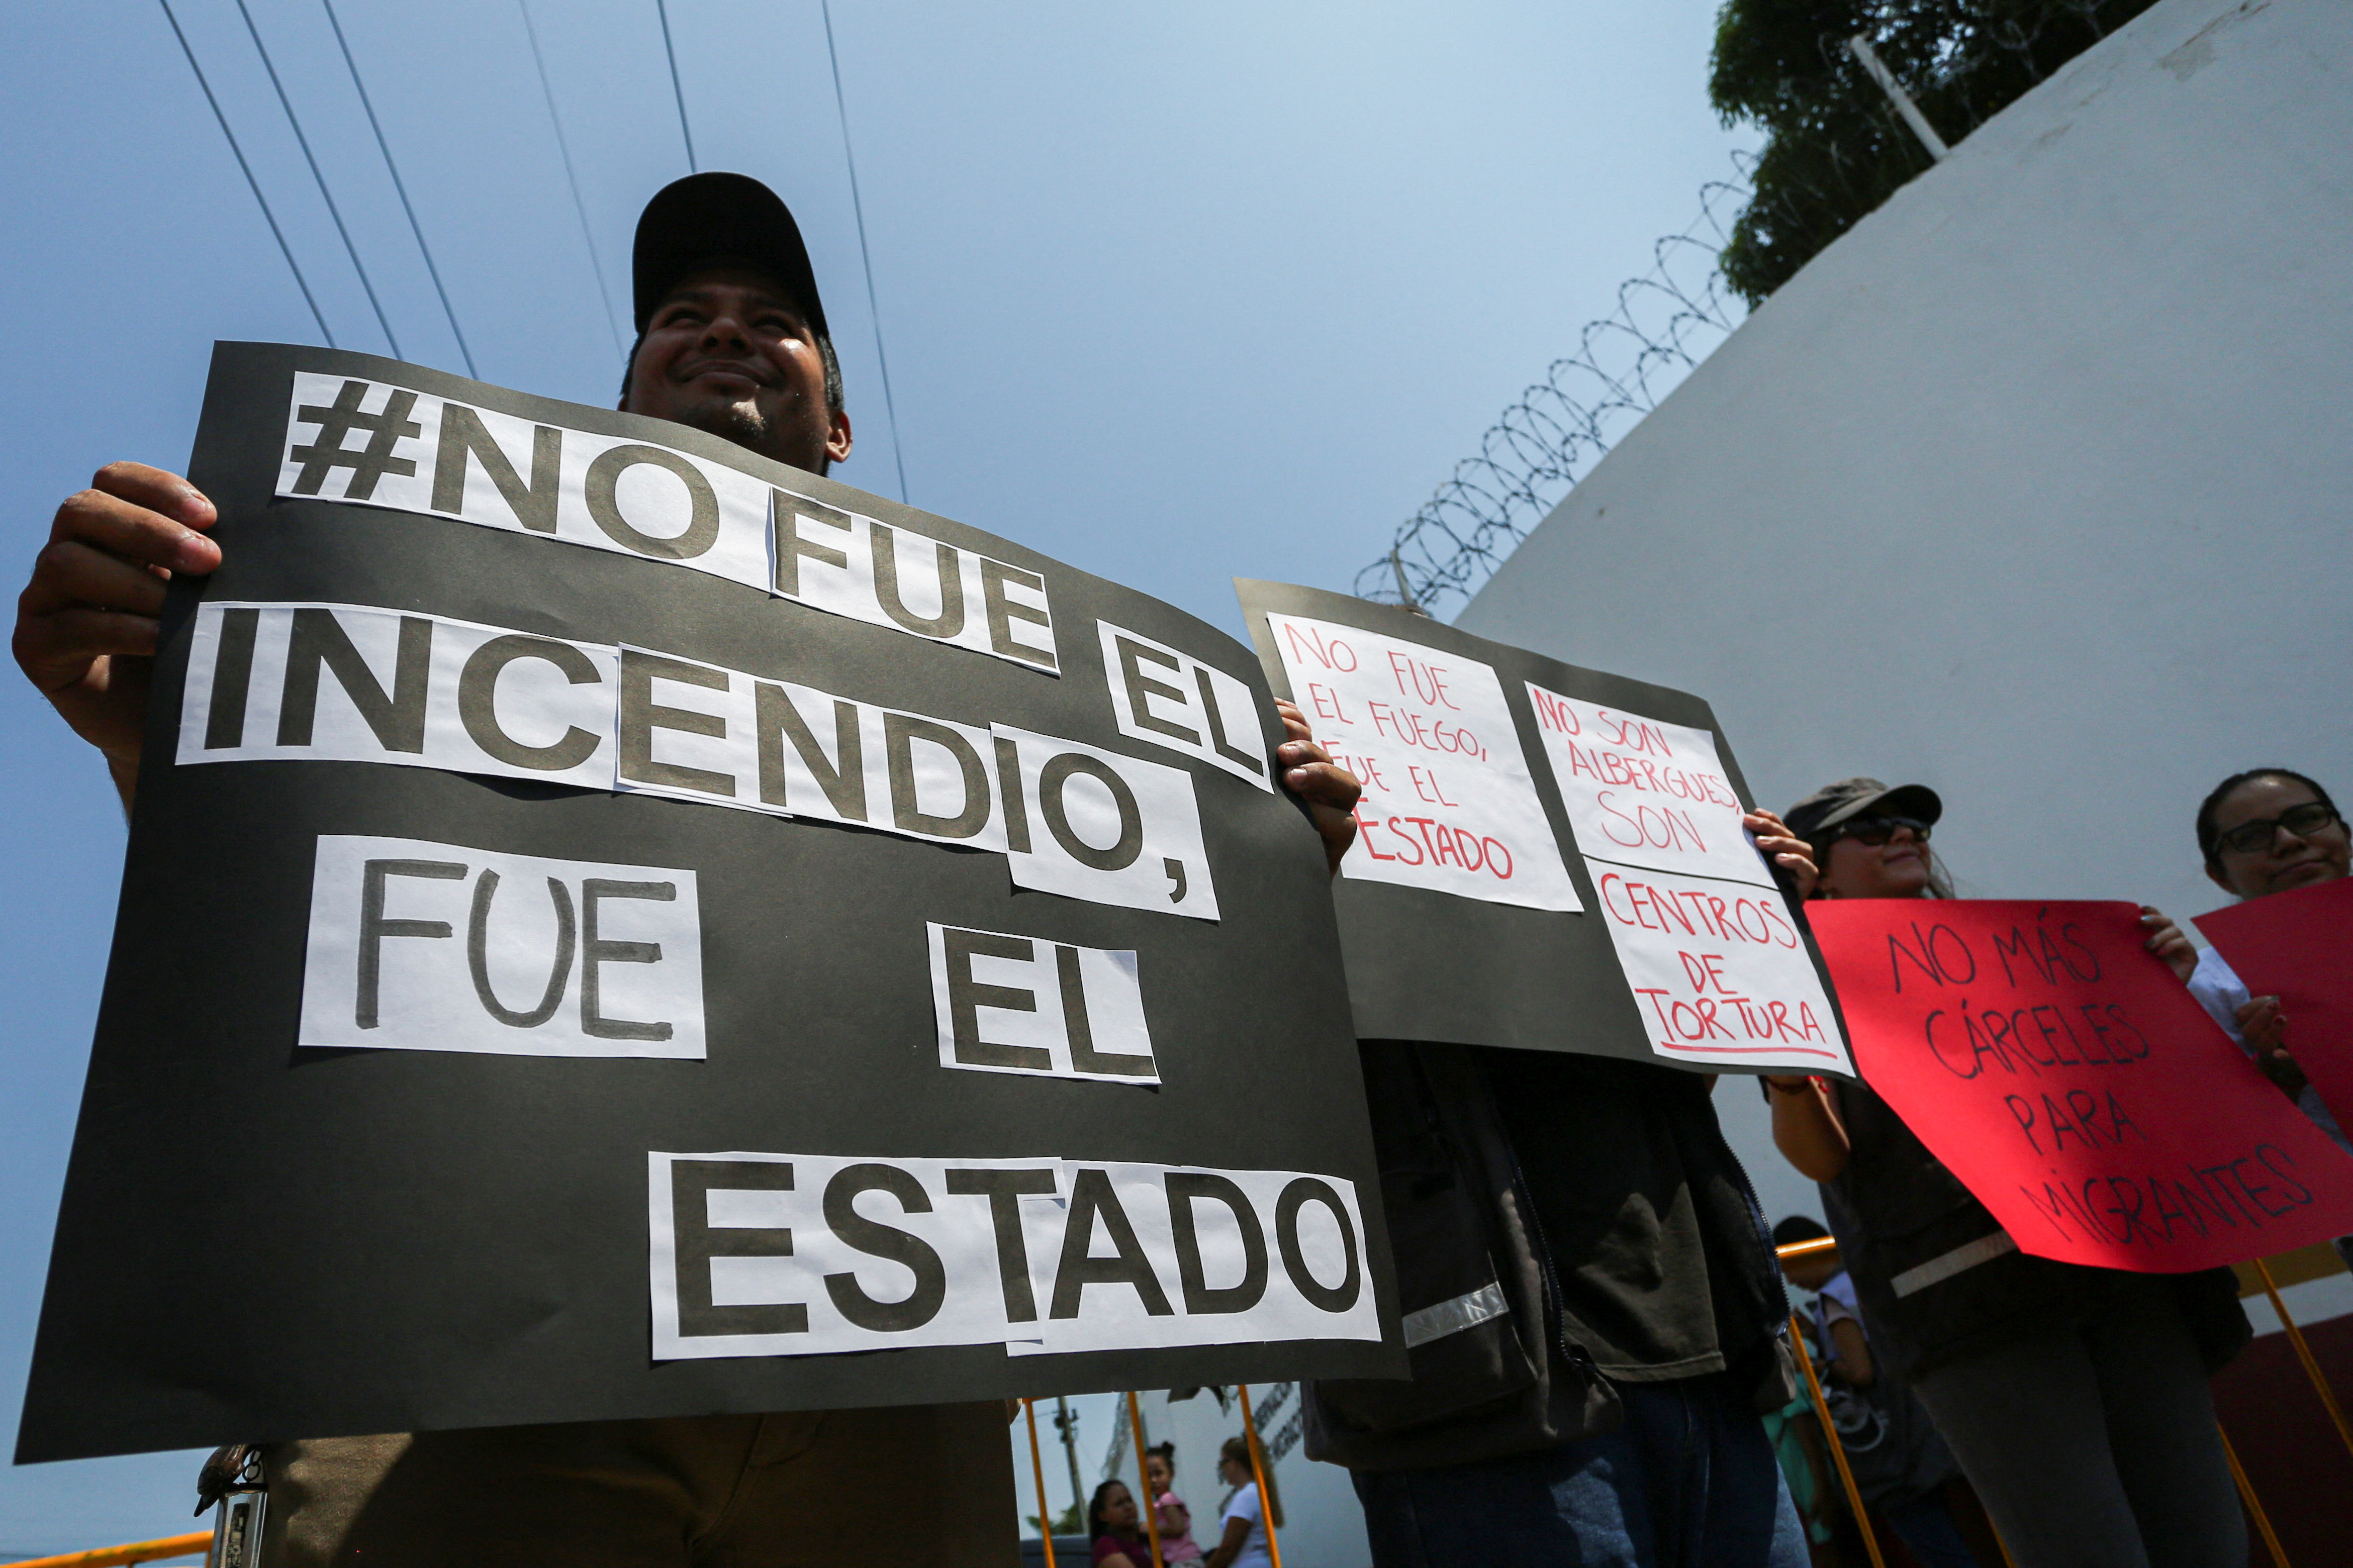 Activists hold placards as they block the entrance to the Siglo XXI migrant detention center, during a protest following the death of several migrants after a fire broke out at a migrant detention center late Monday in the border city of Ciudad Juarez, in Tapachula, Chiapas state, Mexico March 29, 2023. The placard reads: "It wasn't the fire. It was the State". REUTERS/Gabriela Sanabria NO RESALES. NO ARCHIVES